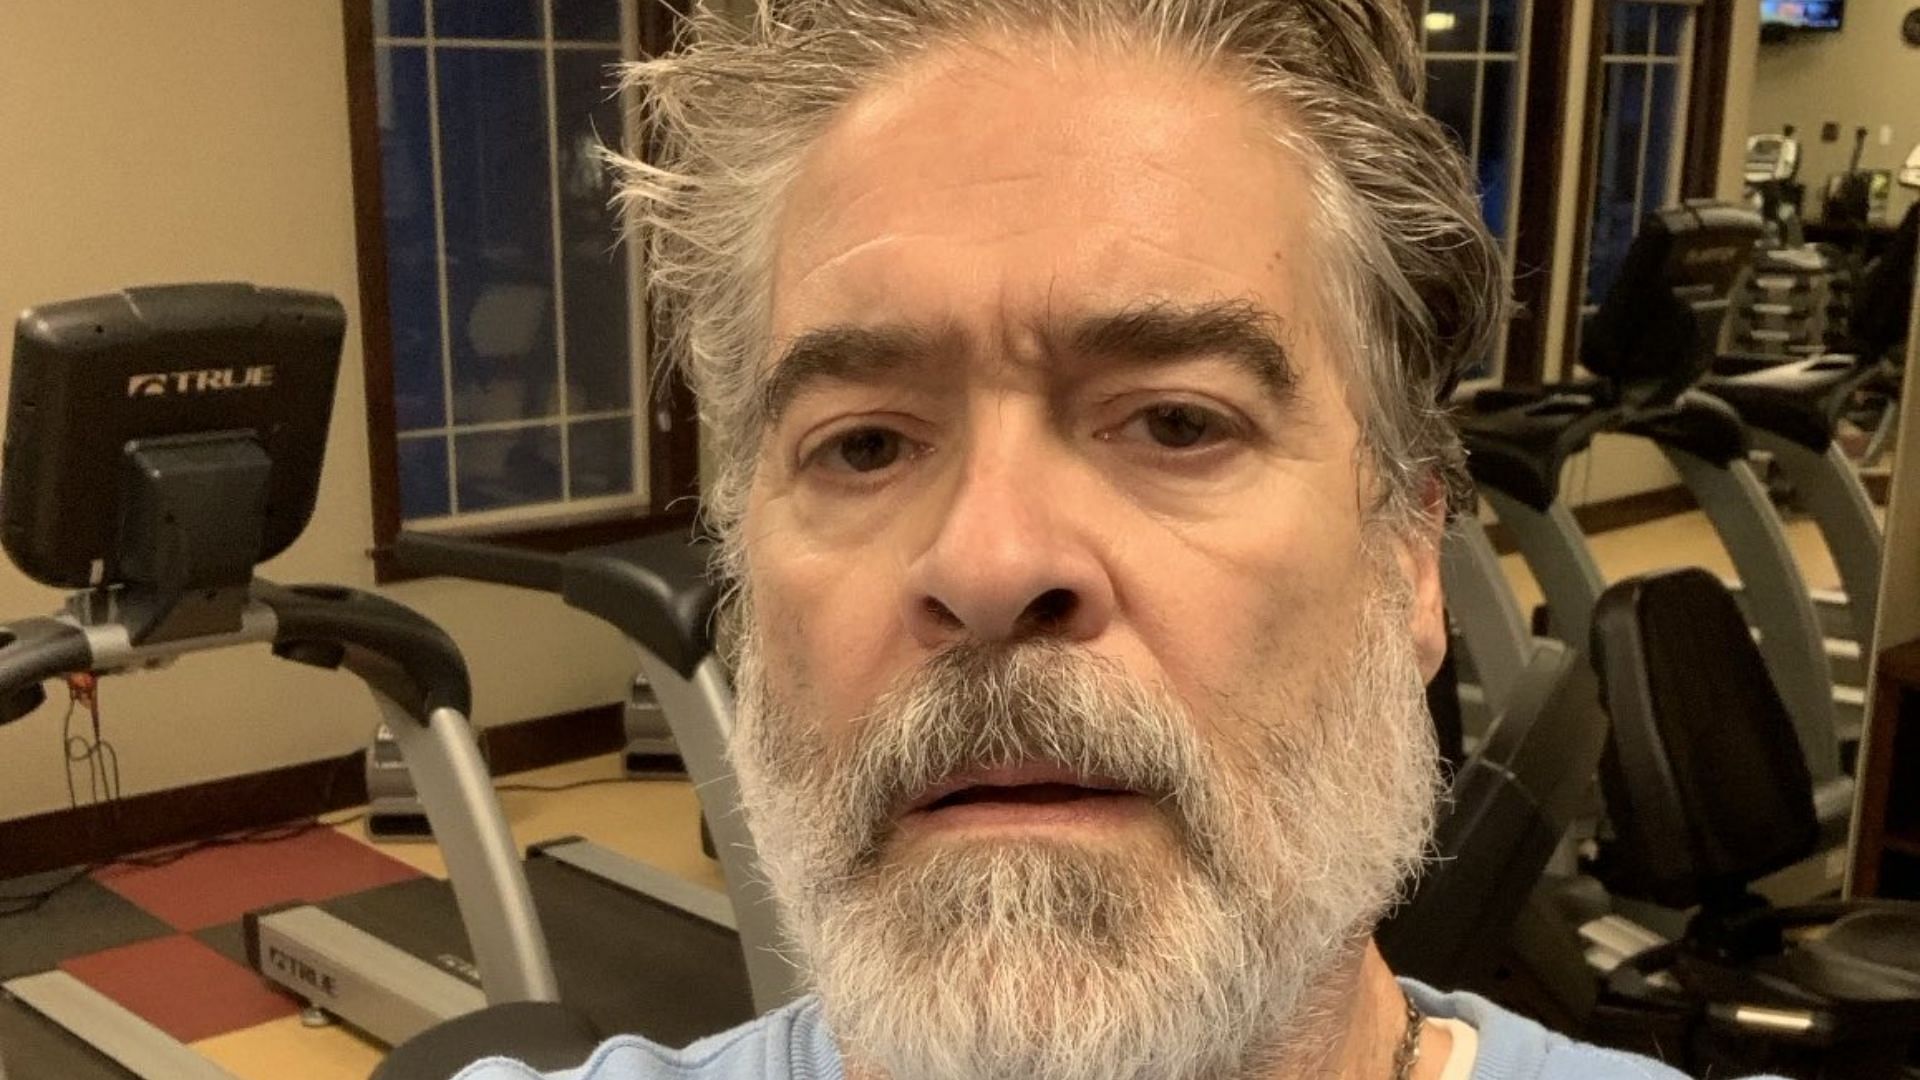 Vince Russo had some interesting things to say this week.